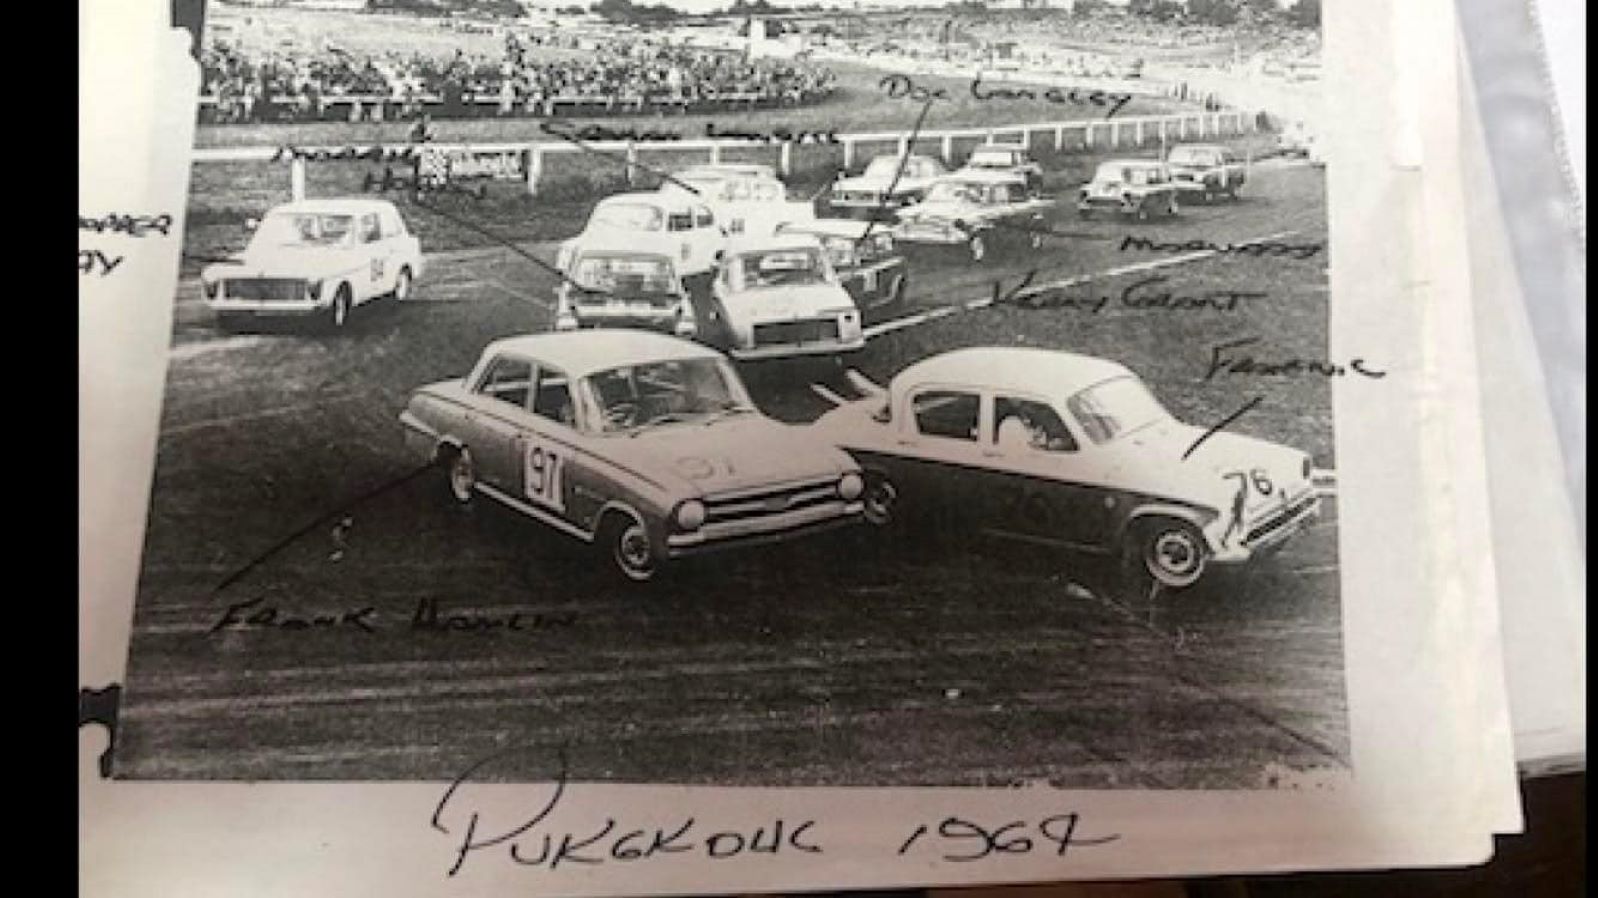 Name:  Pukekohe 1964 #022 1964 Saloon Car field at the Elbow - GP meeting Q 172 kb arch HVRA Bruce Dyer.jpg
Views: 357
Size:  172.4 KB